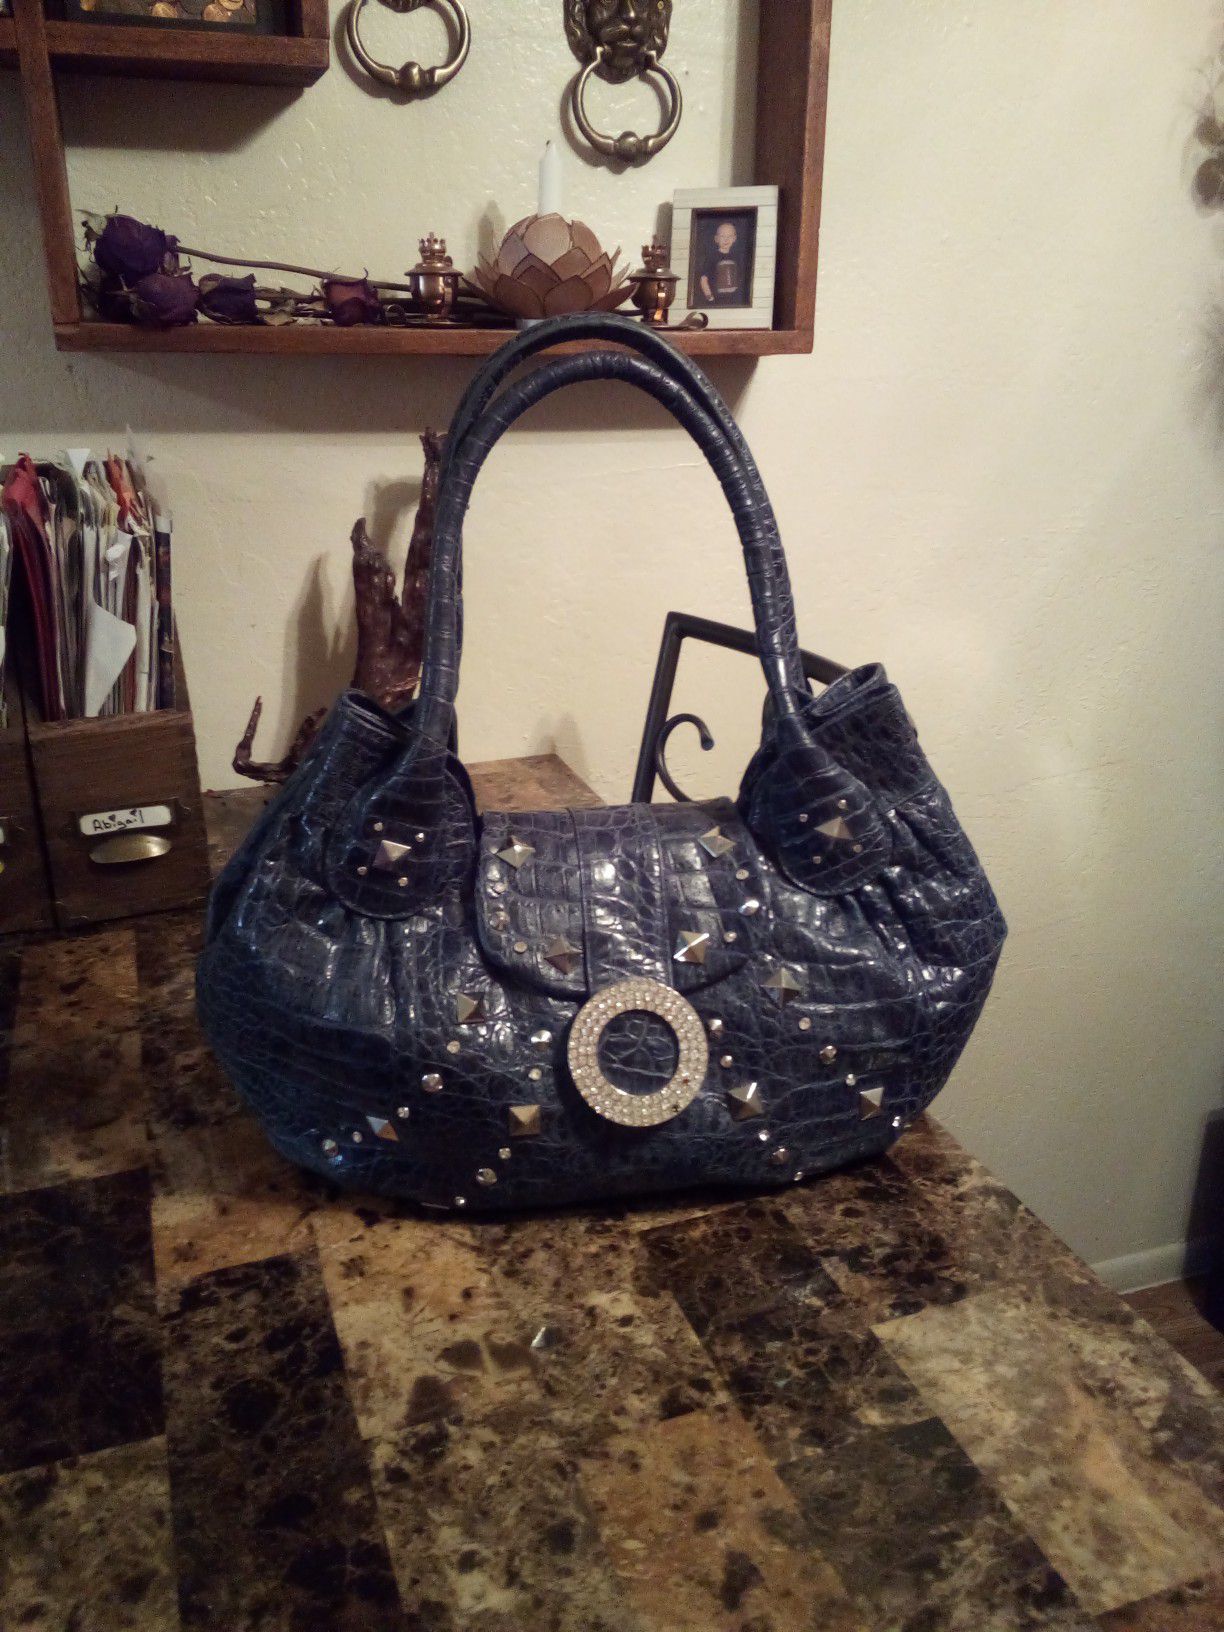 Charm & Luck navy blue Genuine Leather with crocodile embossing studded & rhinestones large hobo shoulder bag purse *Orig Retail$350*